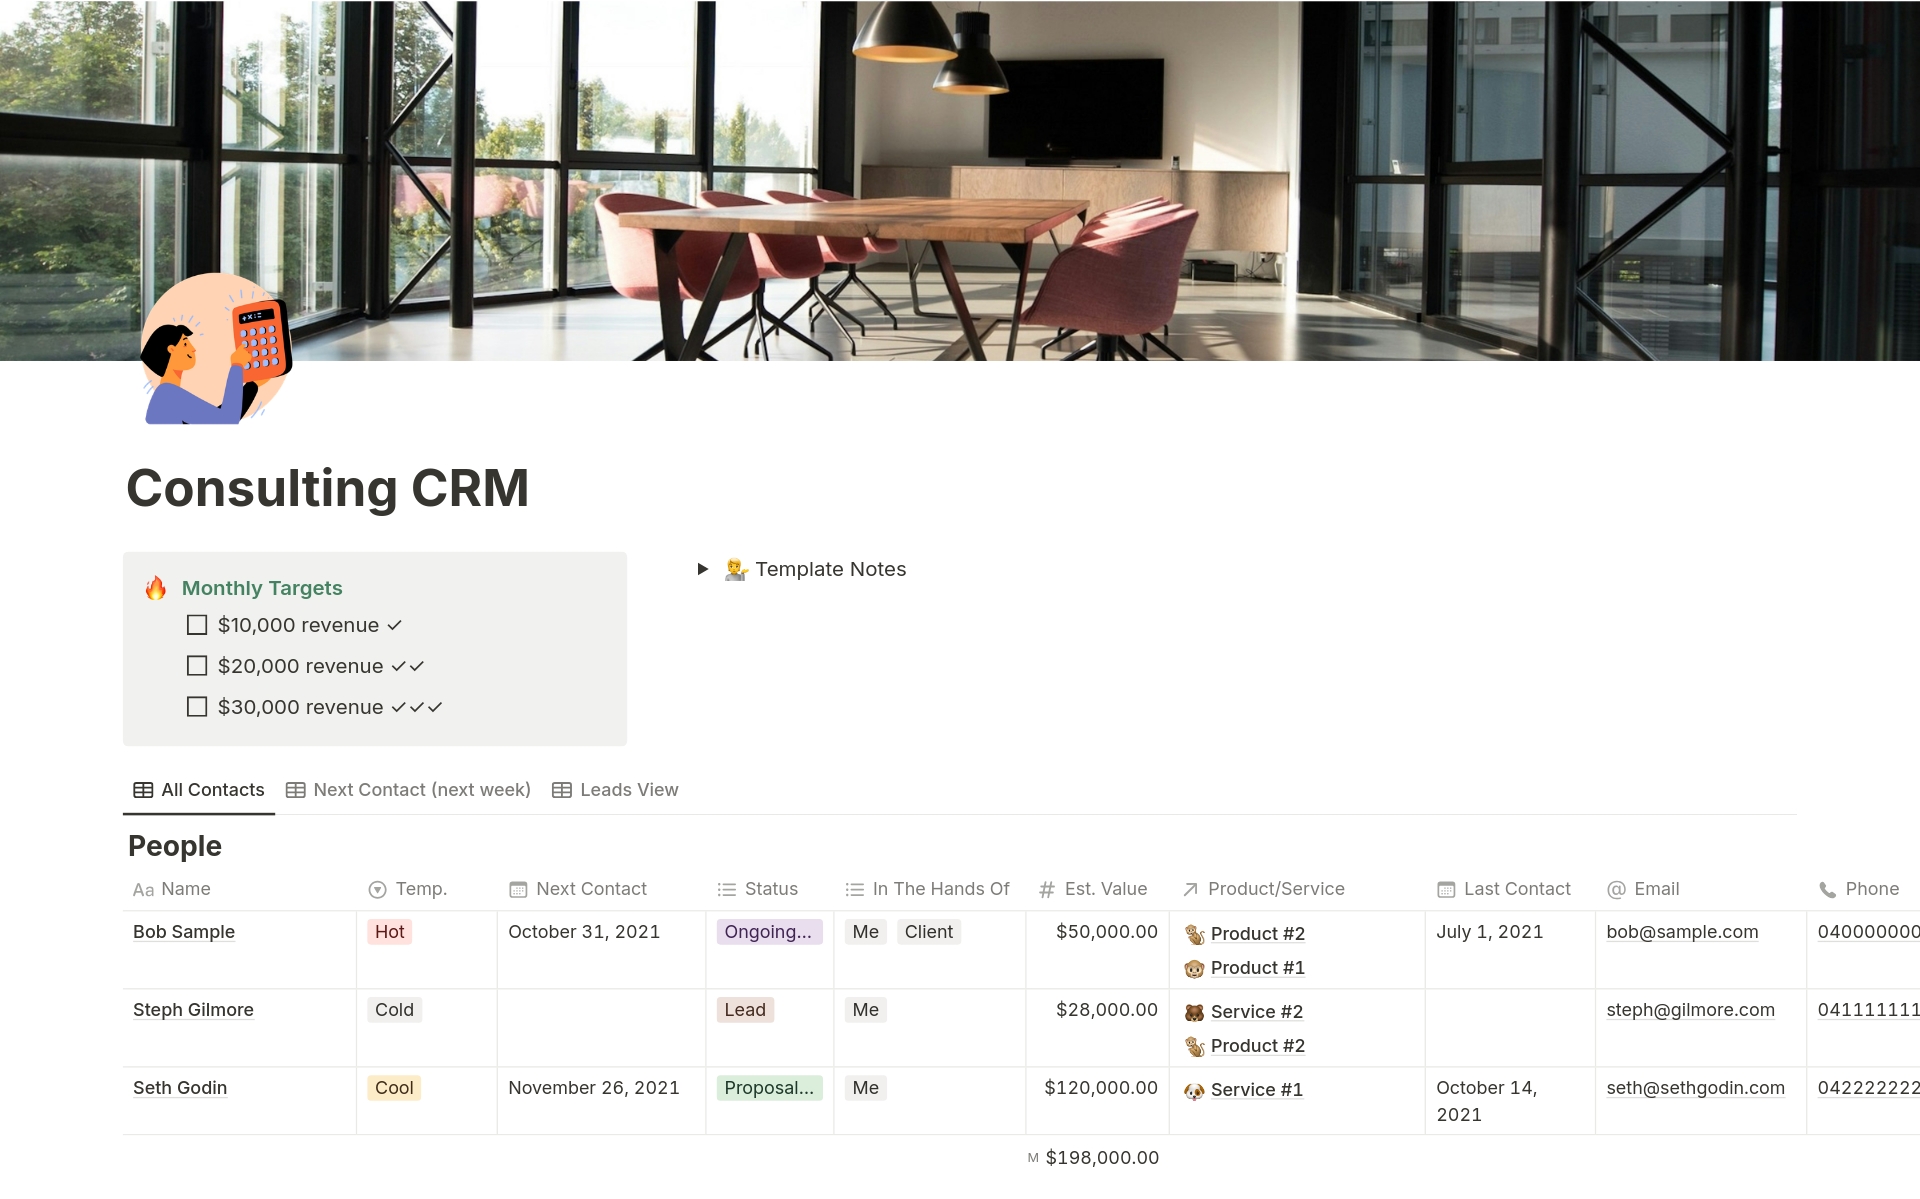 Run the core part of your business — getting and managing customers — with this template and know your CRM will be set up properly to grow with you.